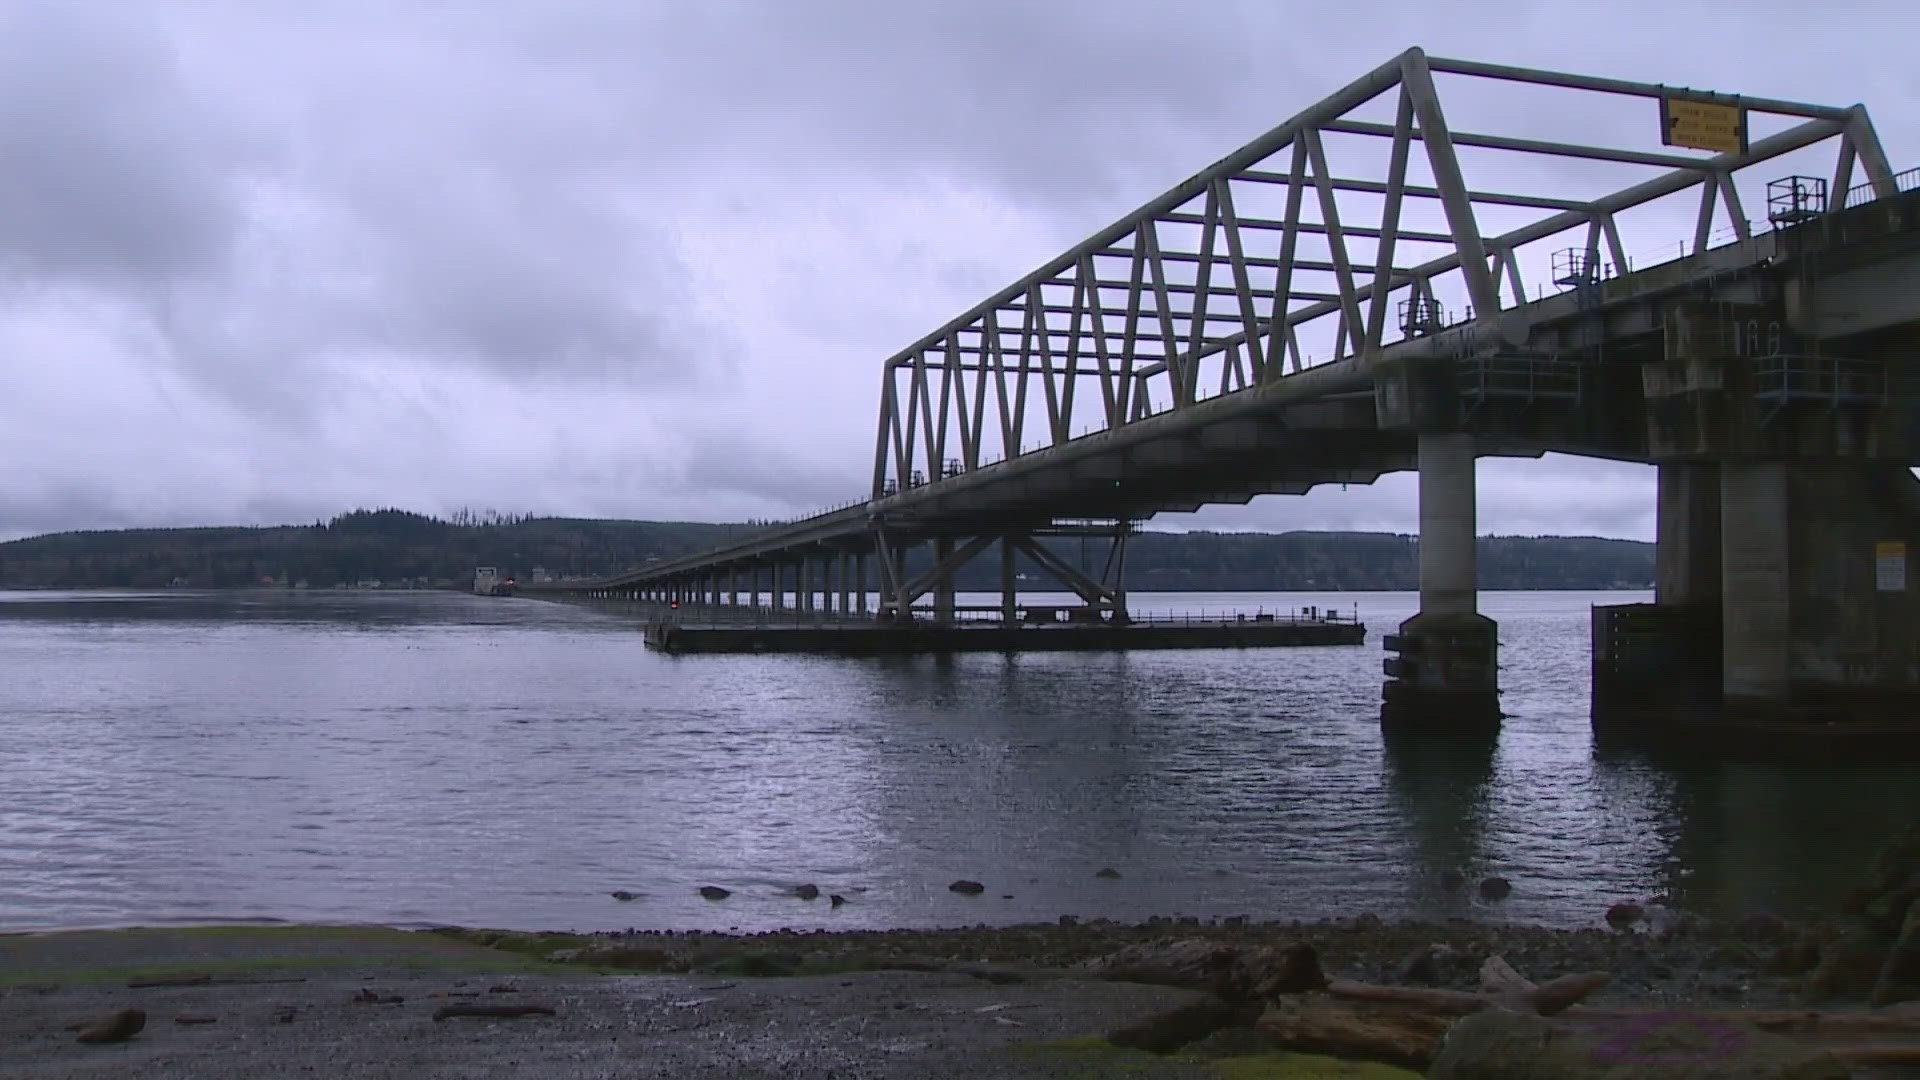 WSDOT will intermittently close the Hood Canal Bridge in May, June and September to complete repairs.